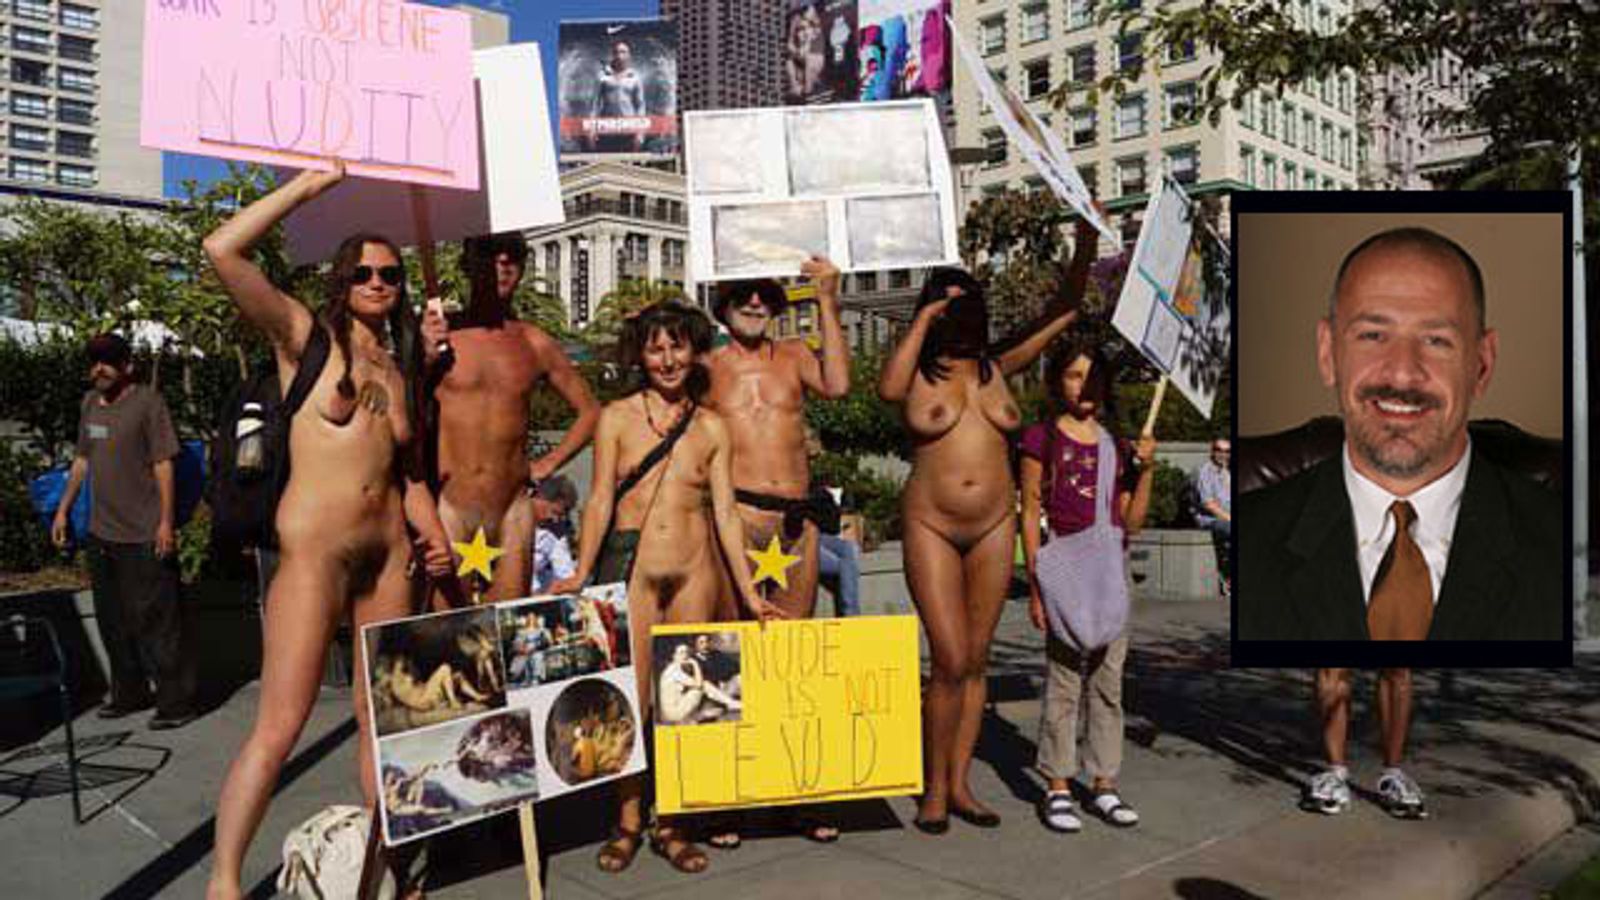 Nudist Activists Filed Amended Complaint in Federal Court